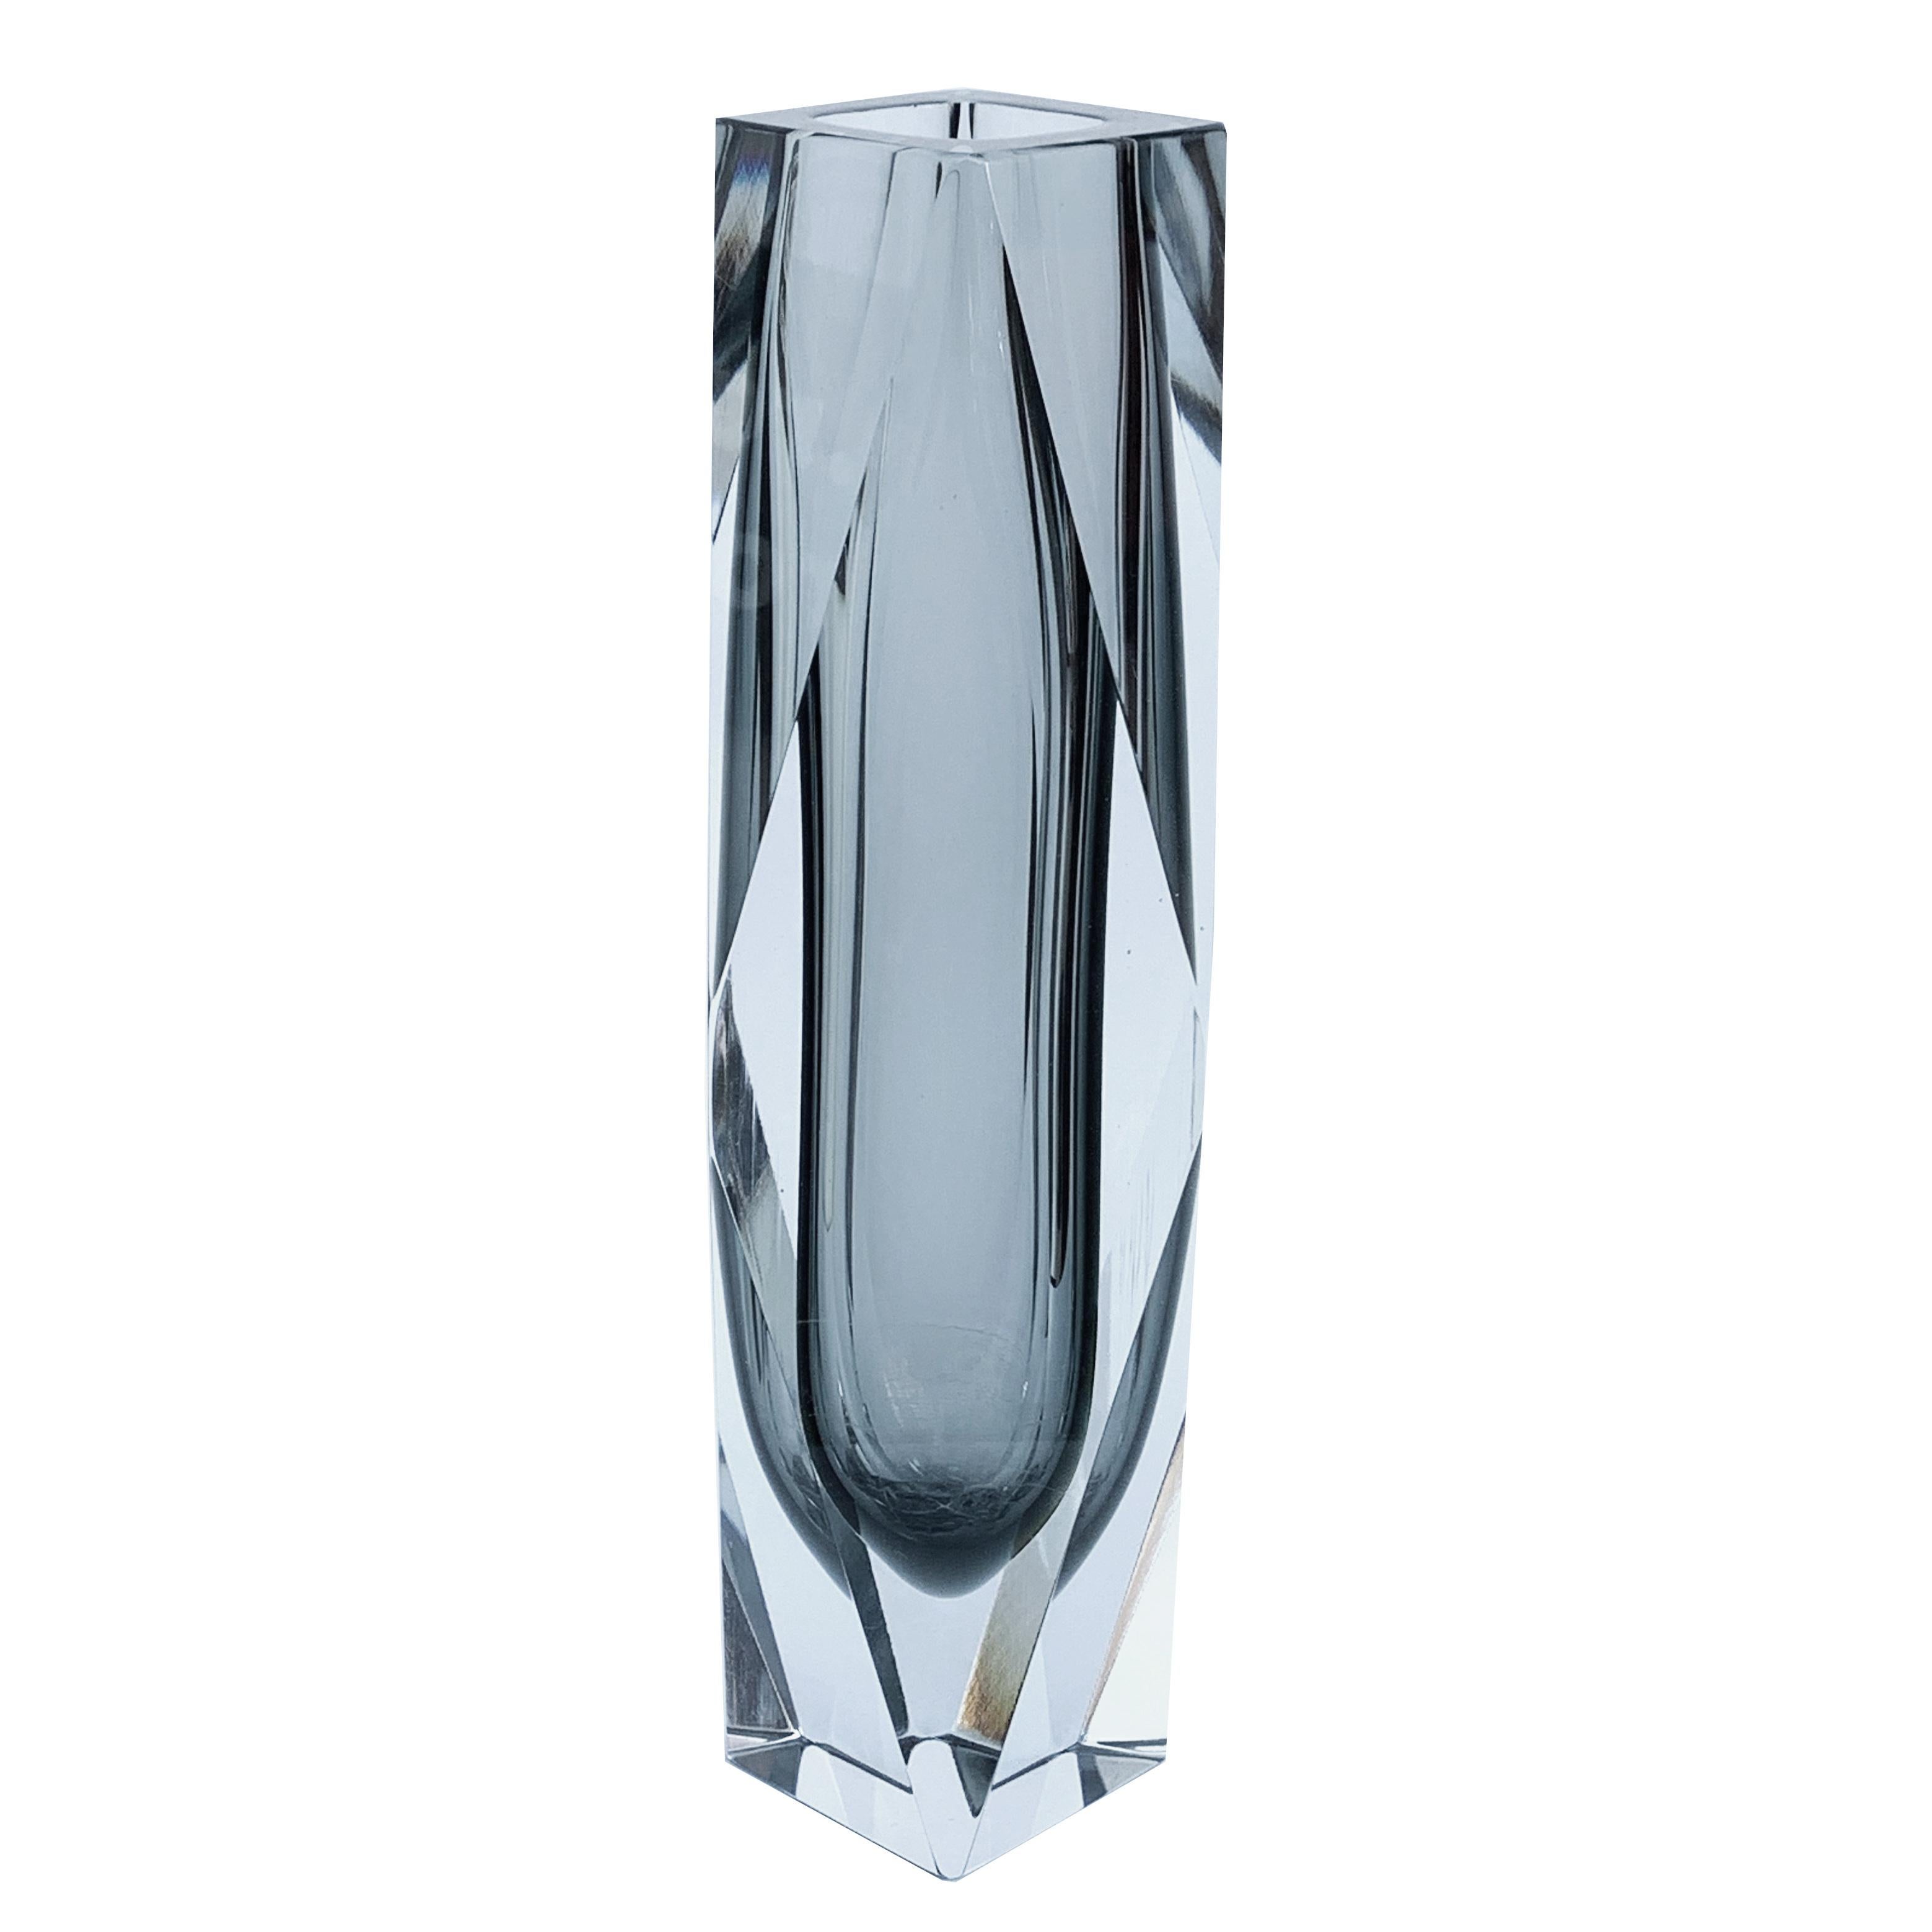 Large multi-faceted glass vase by Mandruzzato.
This beautiful piece is very elegant thanks to the delicate line and the smoky-transparent color. It is rare, not only for its shape but also for its dimensions: indeed the item is a little bit bigger